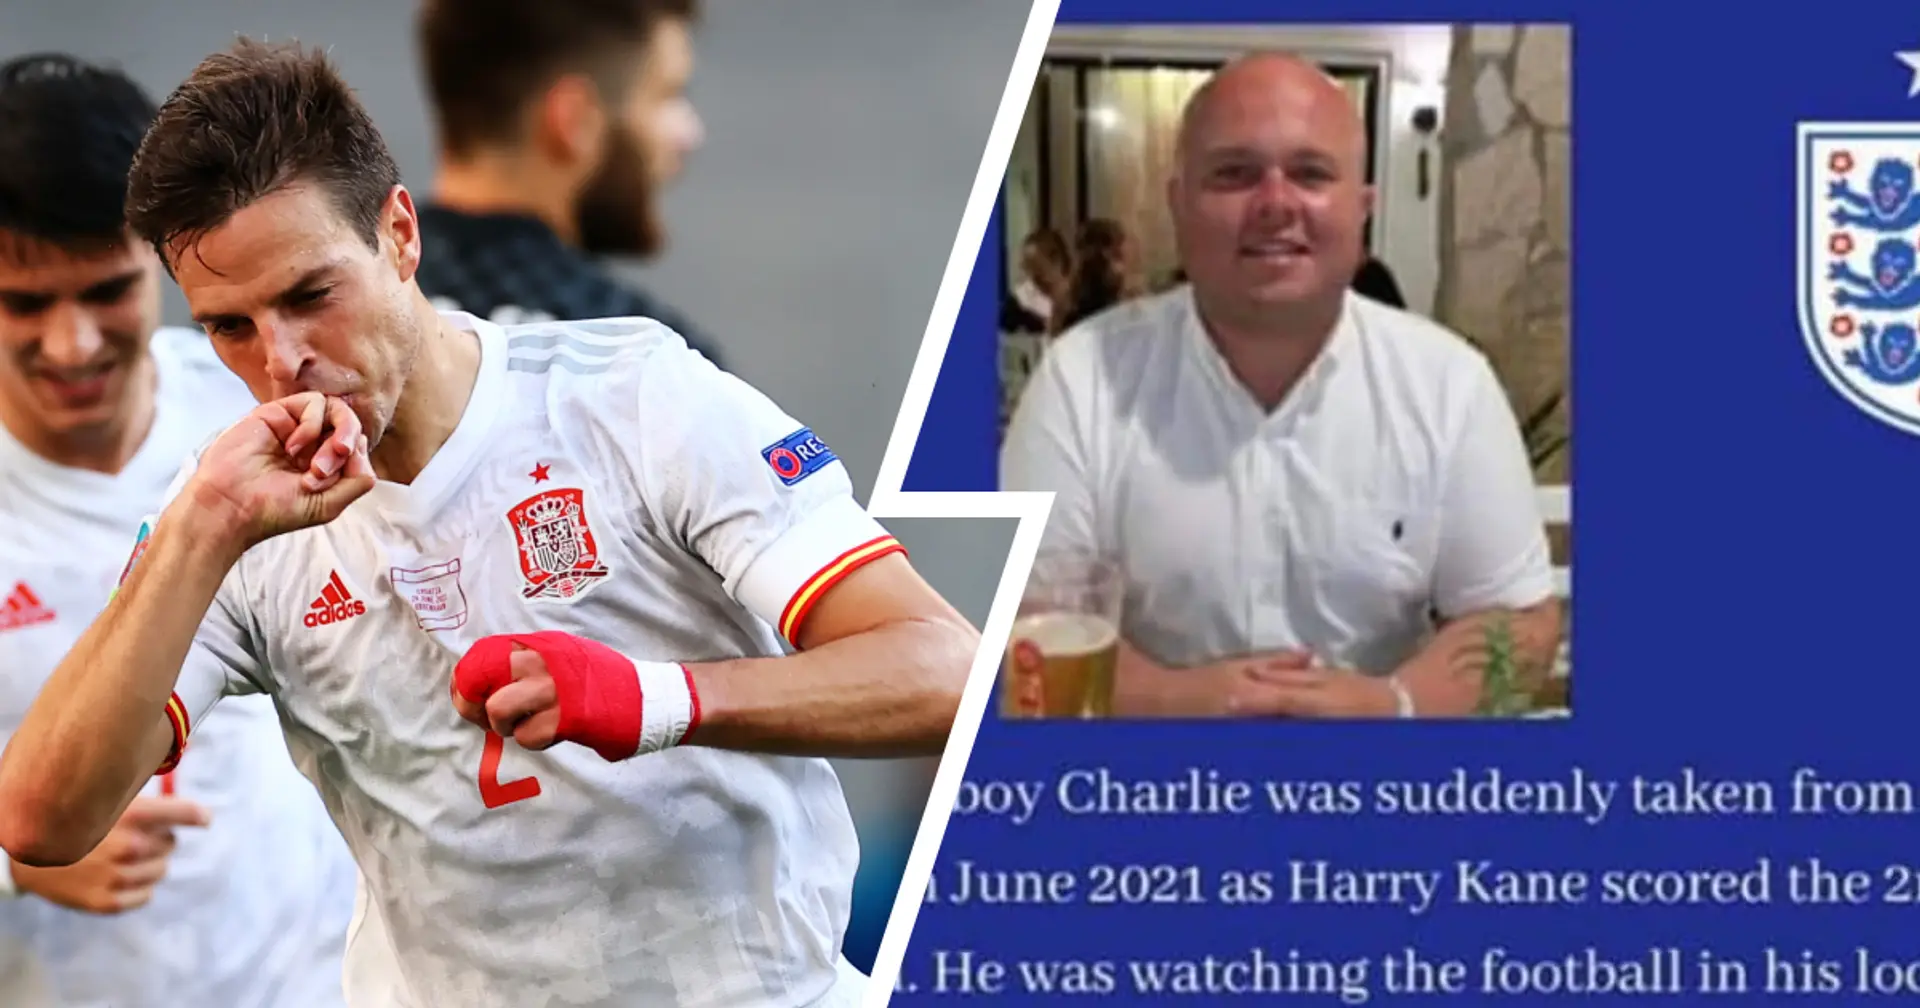 Chelesea stars pay tribute to lifelong Chelsea fan who died watching England & 3 more under-radar stories